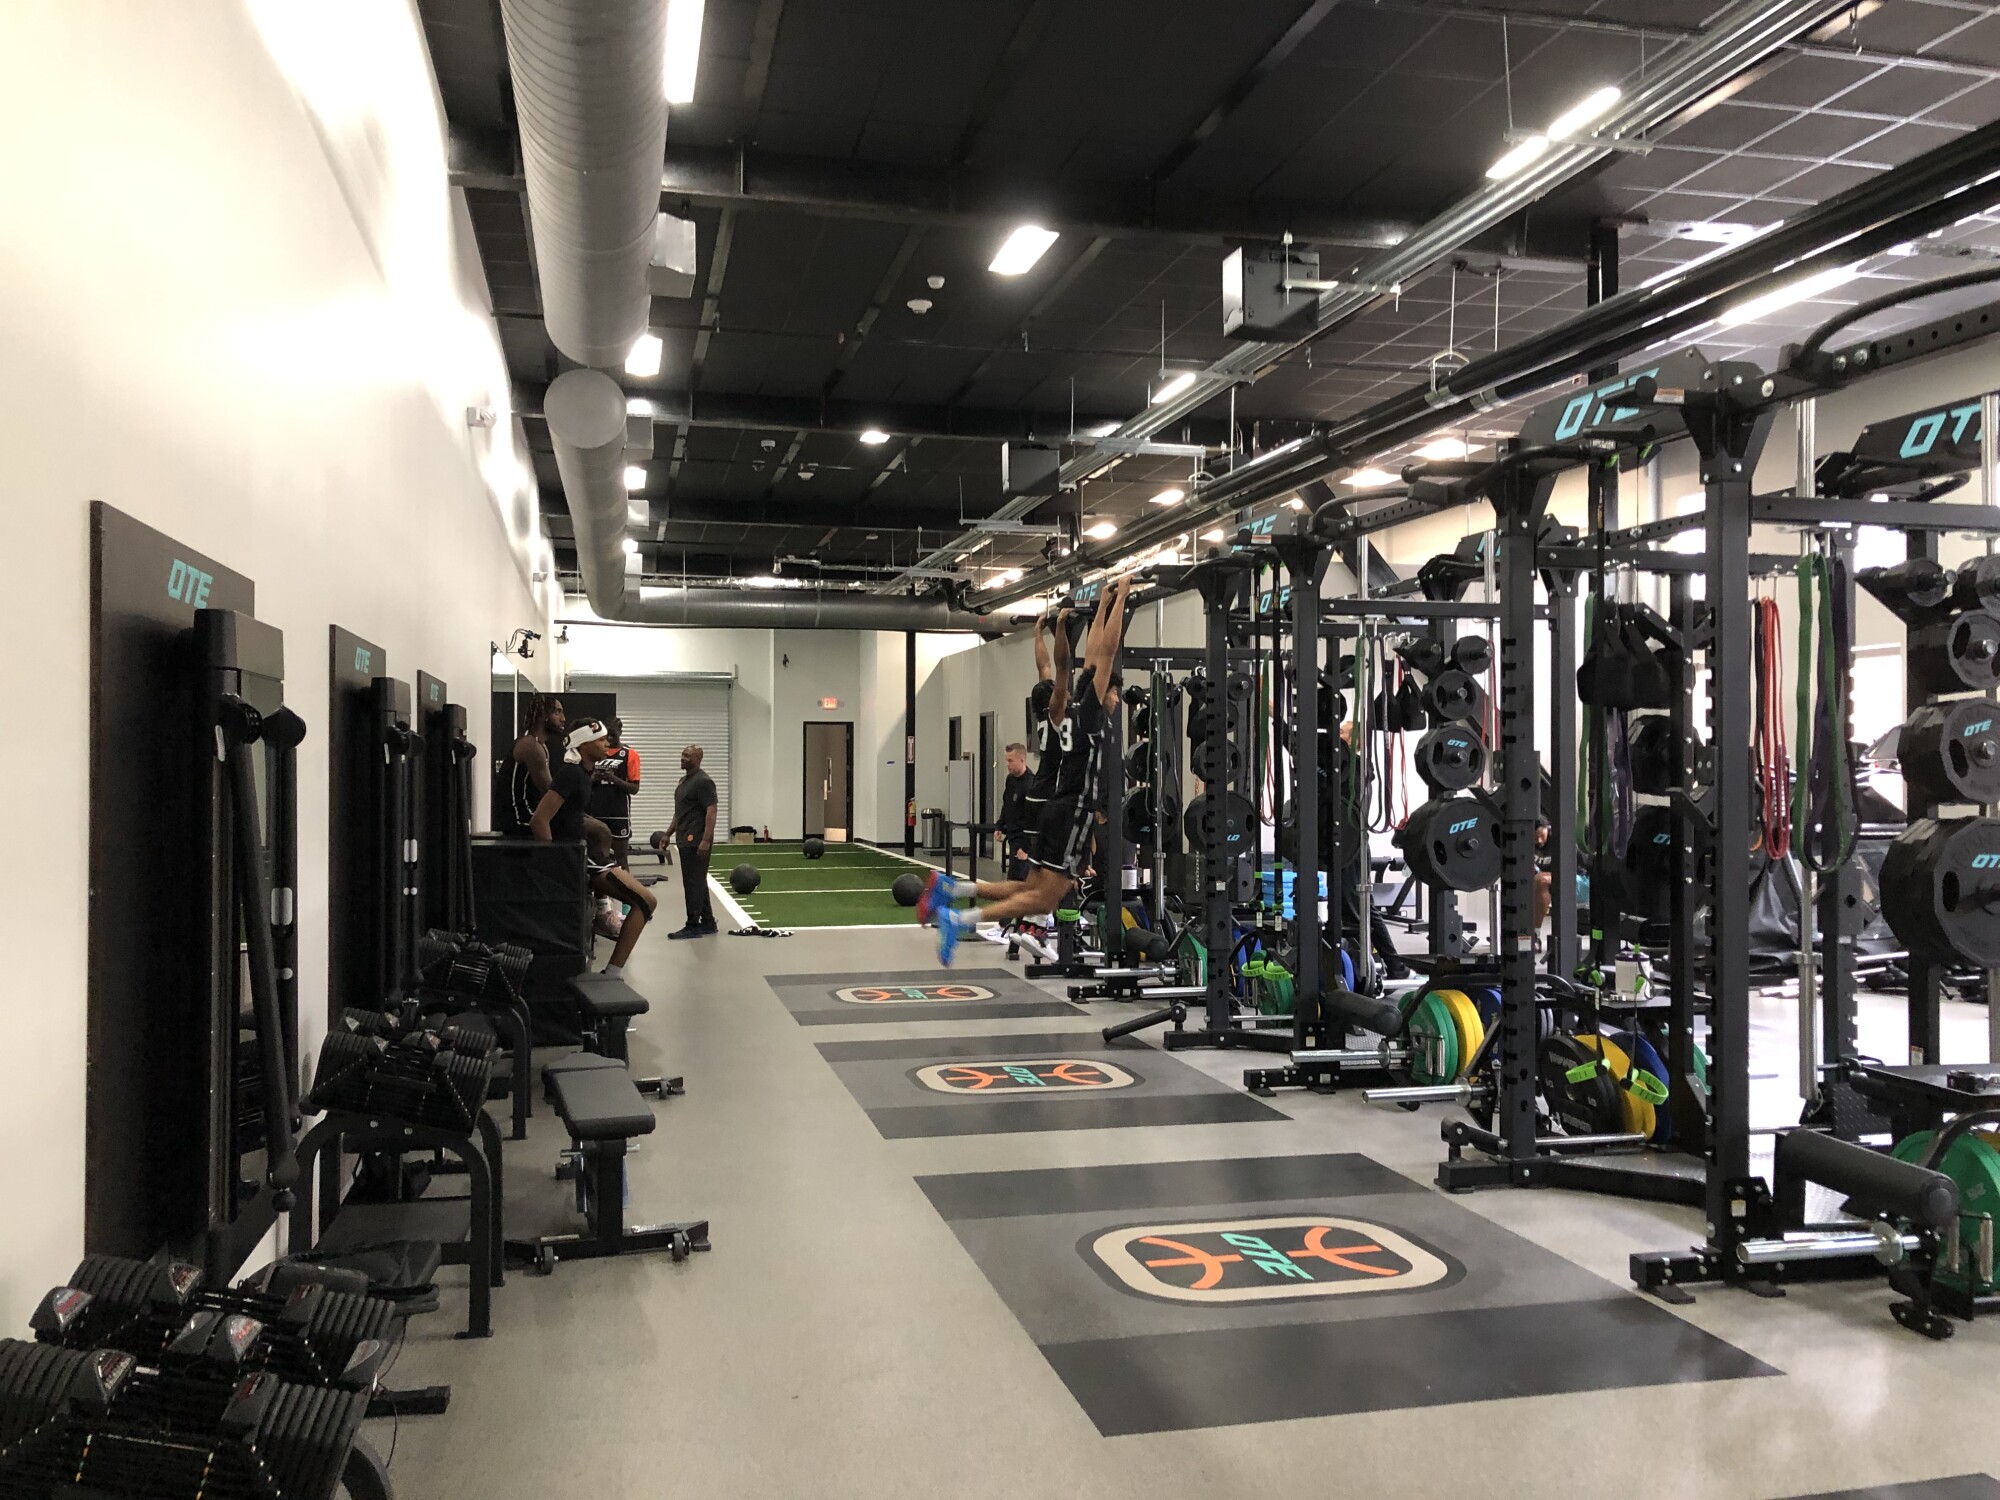 Overtime Elite basketball players use an NBA-style weight room on campus in Atlanta.